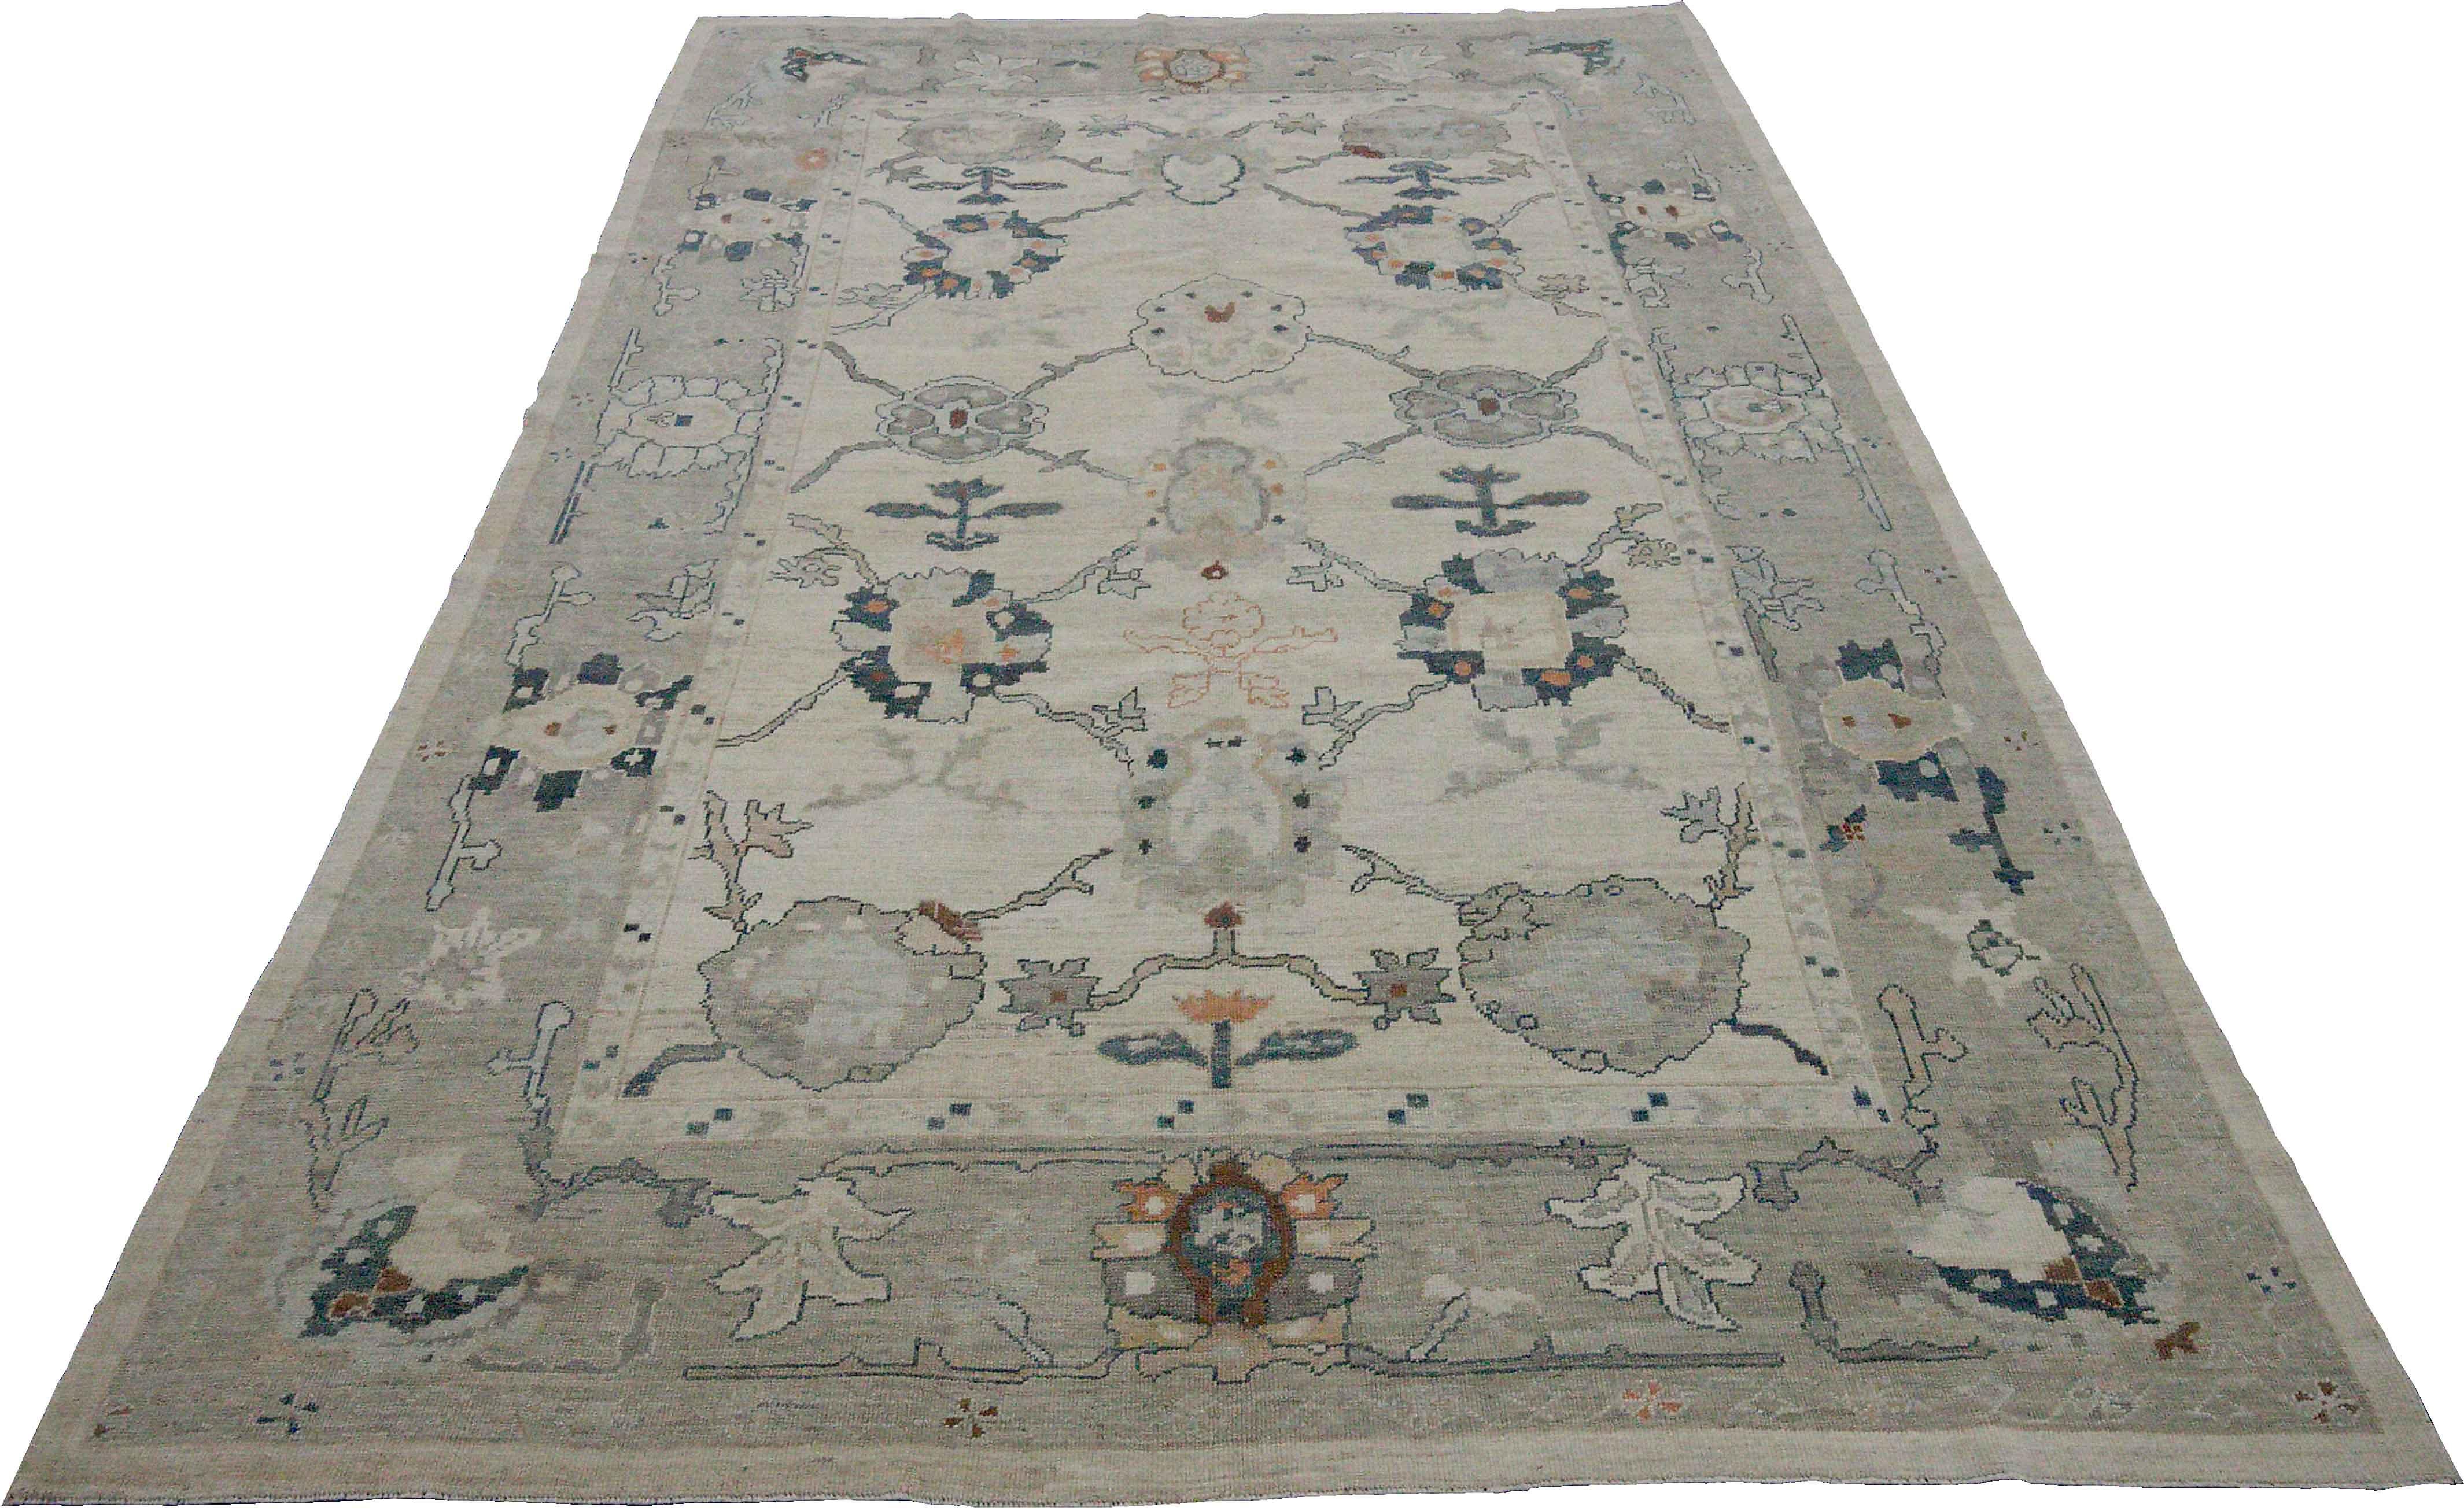 New Turkish rug made of handwoven sheep’s wool of the finest quality. It’s colored with organic vegetable dyes that are certified safe for humans and pets alike. It features floral details in navy blue and gray over an exquisite ivory field. Flower